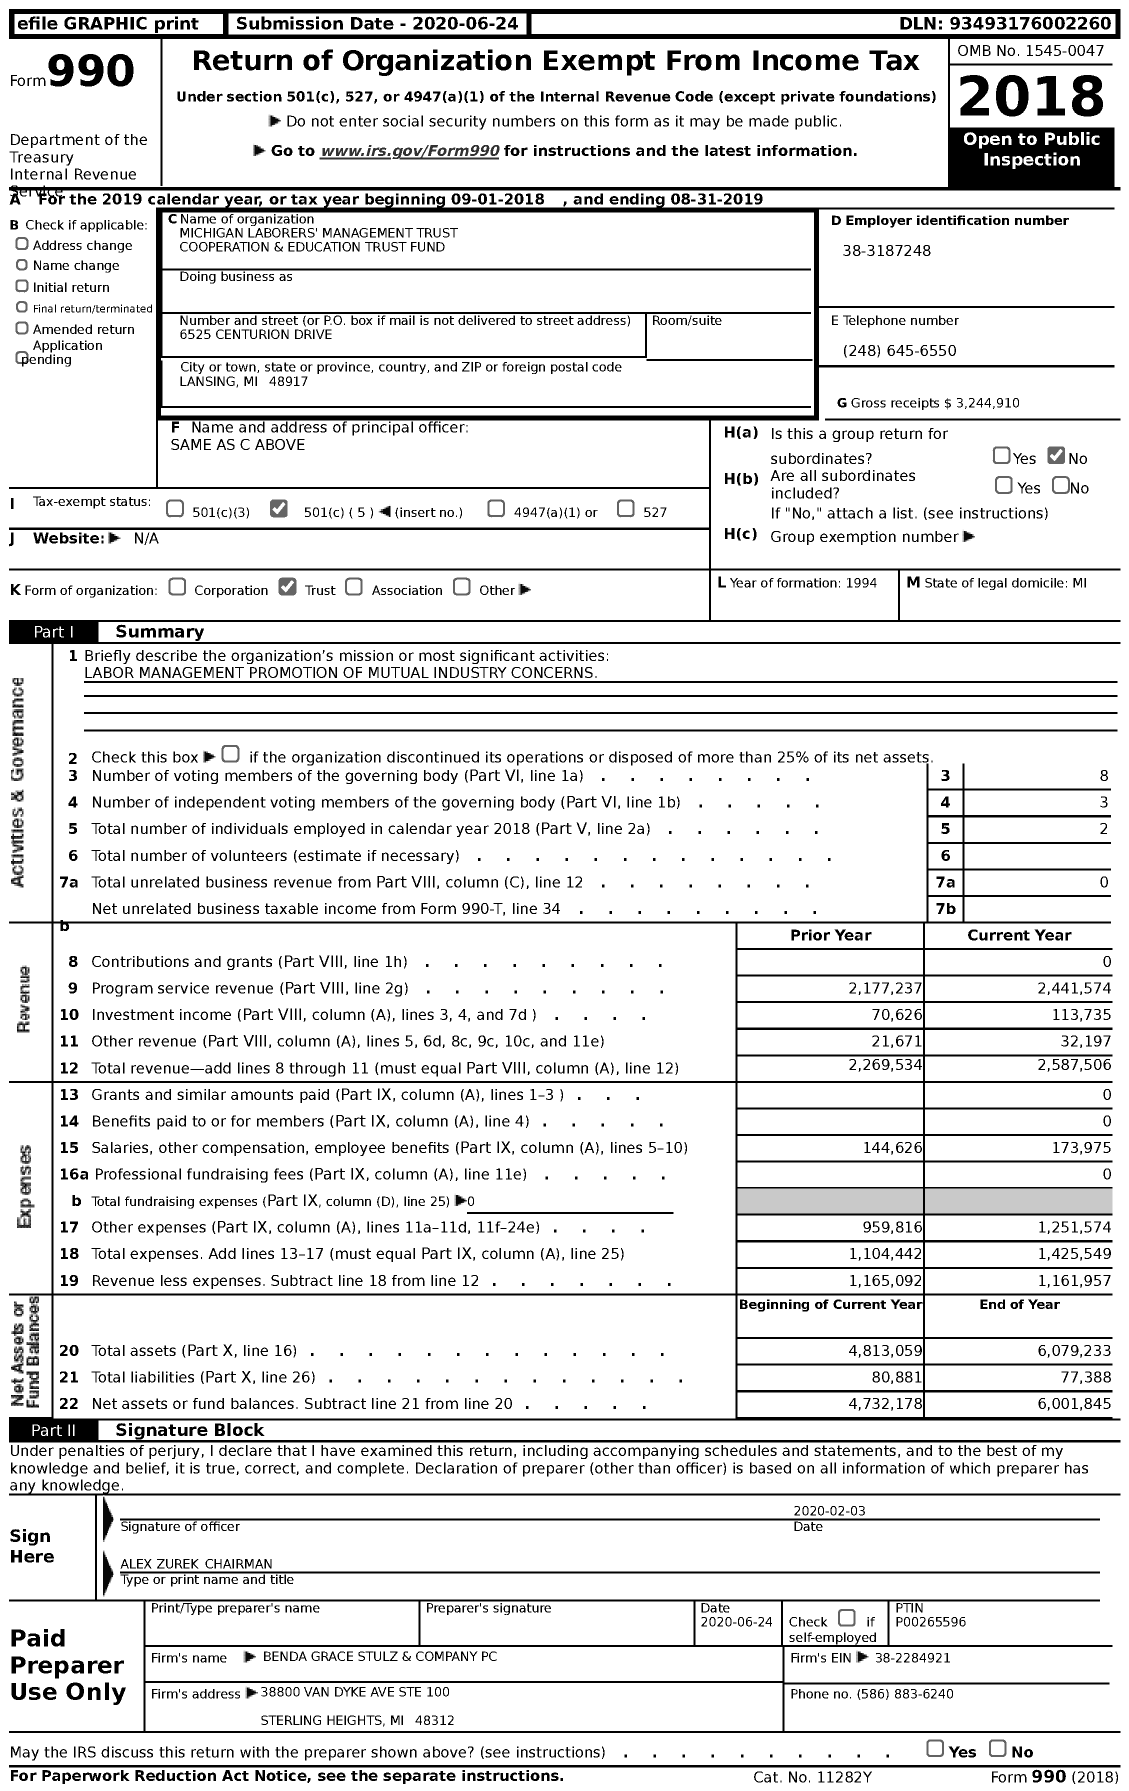 Image of first page of 2018 Form 990 for Michigan Laborers' Management Trust Cooperation and Education Trust Fund